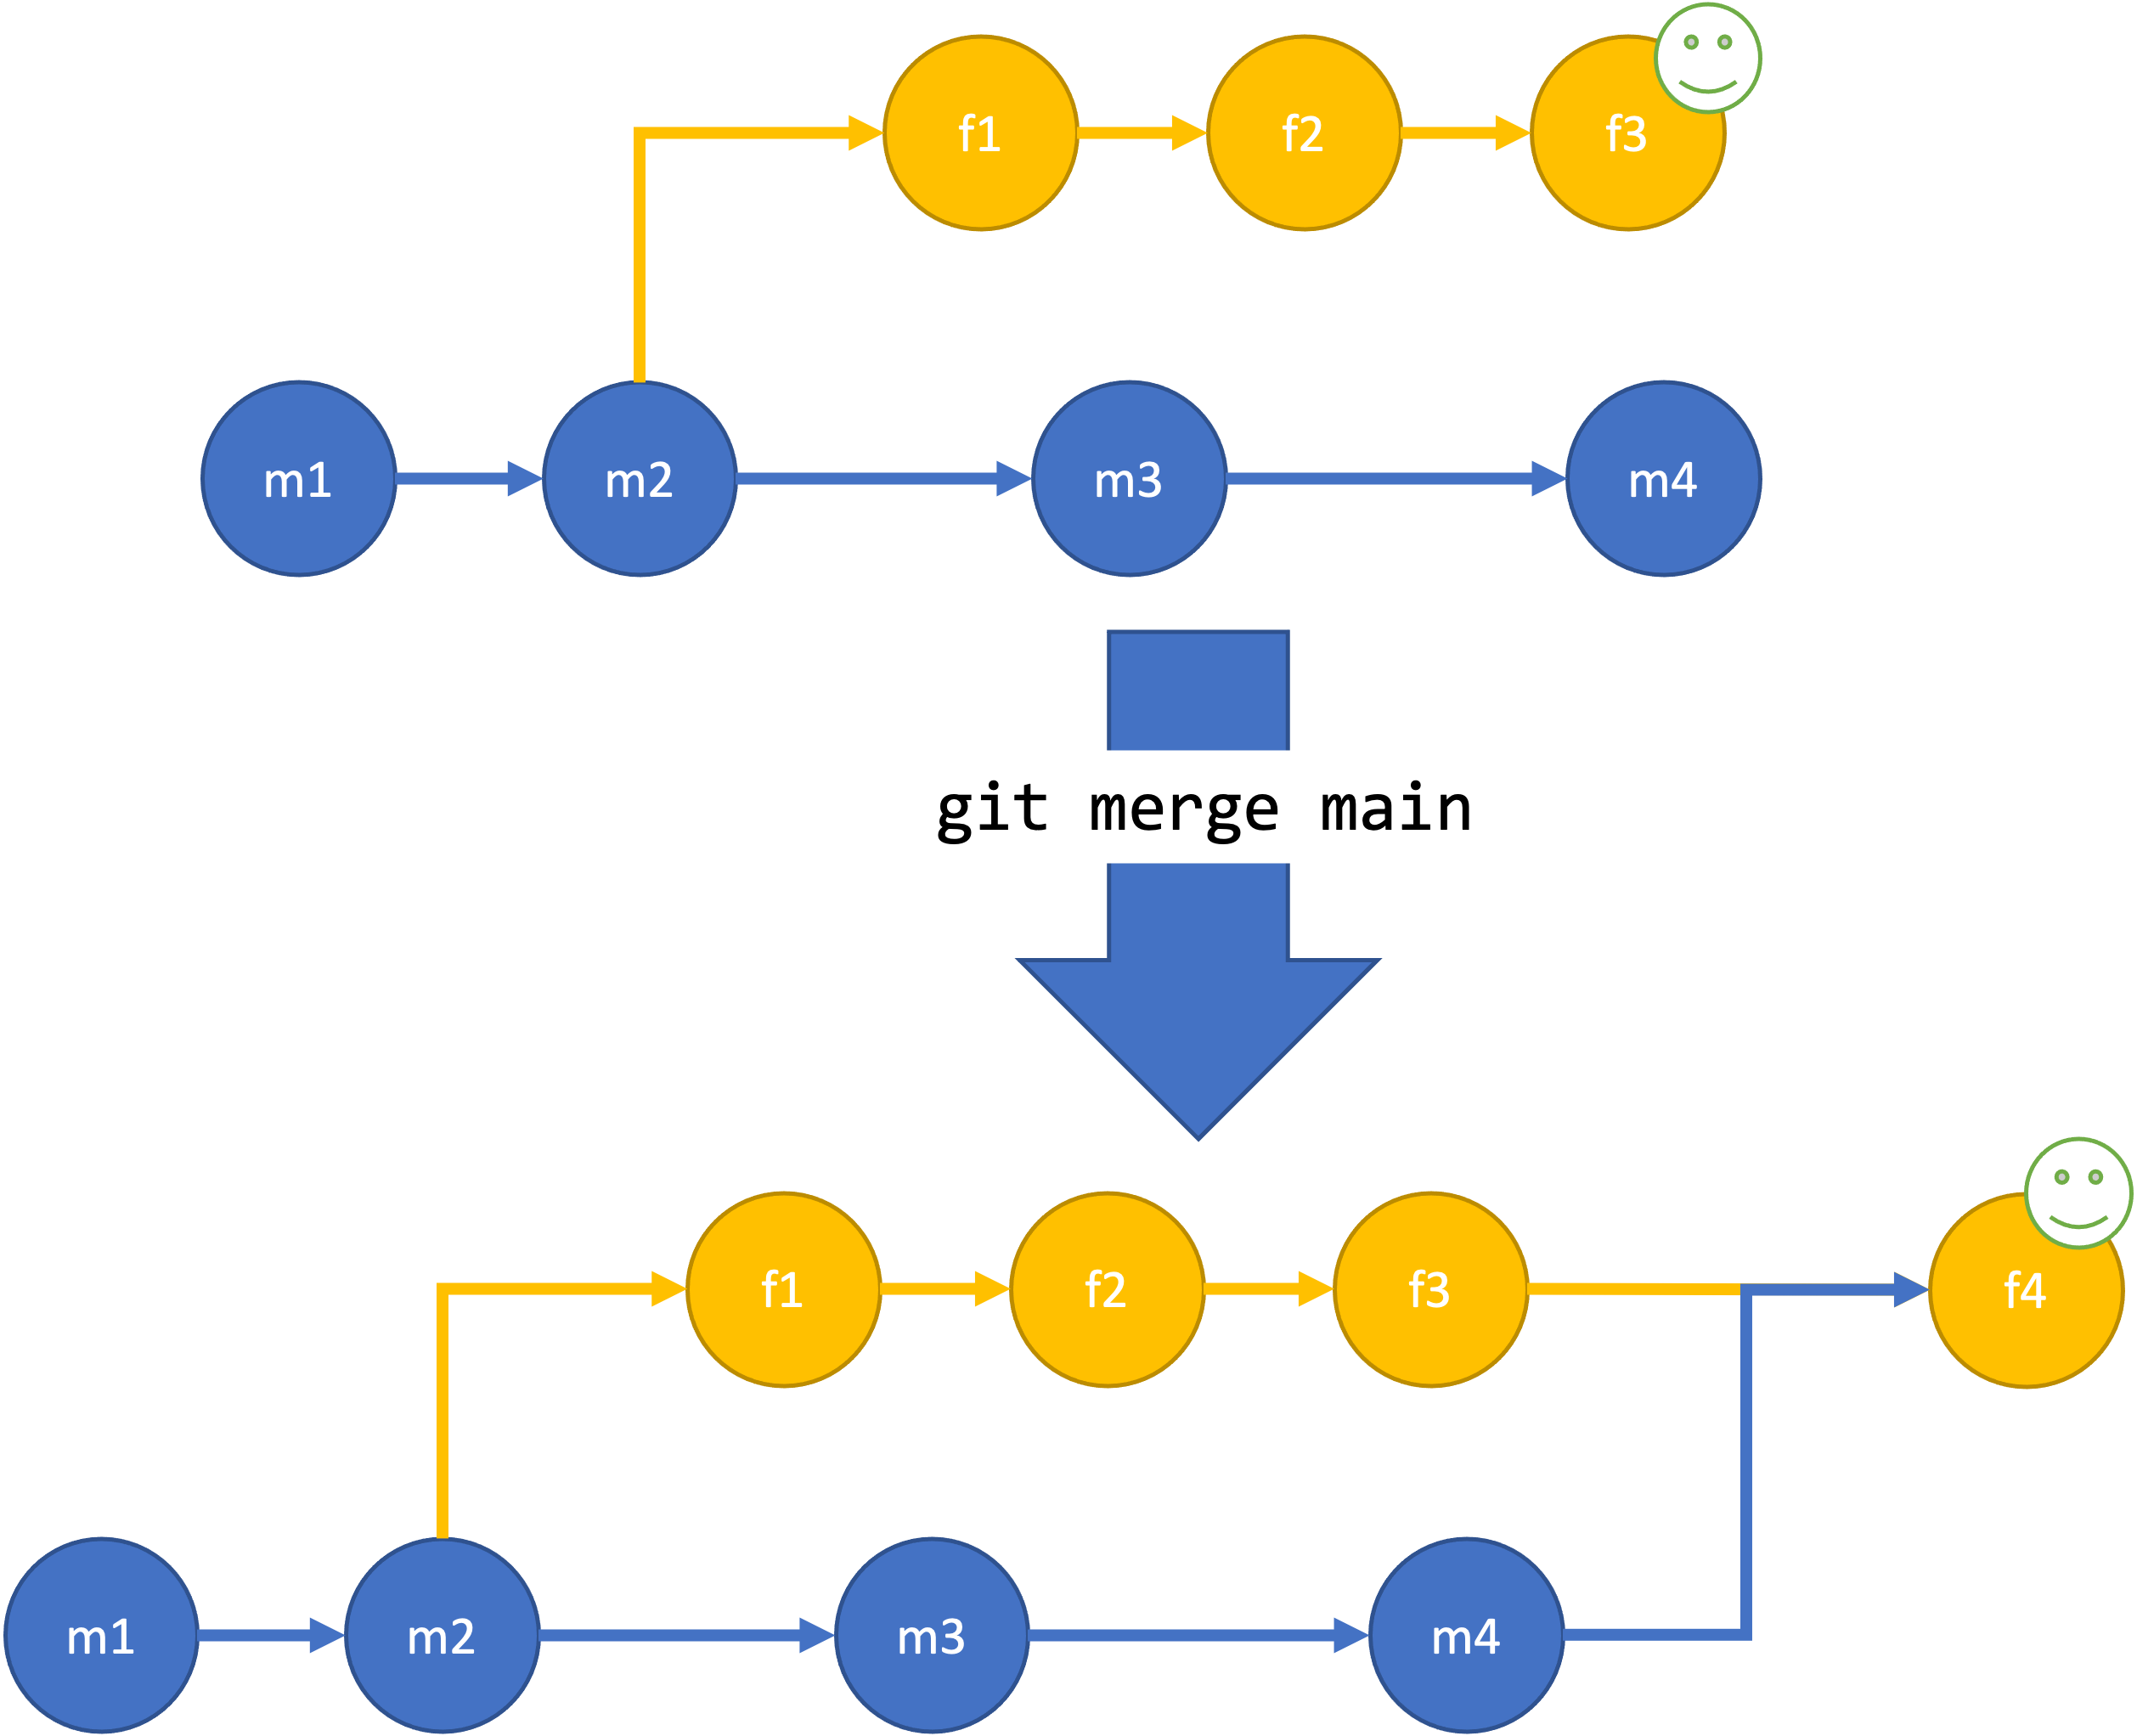 Figure showing the process of merging the main branch into the feature branch. First a graph diagram of a repository is shown with a main and feature branch. The feature branch with three commits splits off the main branch after two commits, and the main branch has an additional two commits after the split. A smiley face is on the third commit of the feature branch to show the current location. Below is an arrow with the text "git merge main" followed by the same repository with a new arrow from the last commit on the main branch to a new commit on the feature branch, showing the changes from the main branch have been merged into the changes on the feature branch.